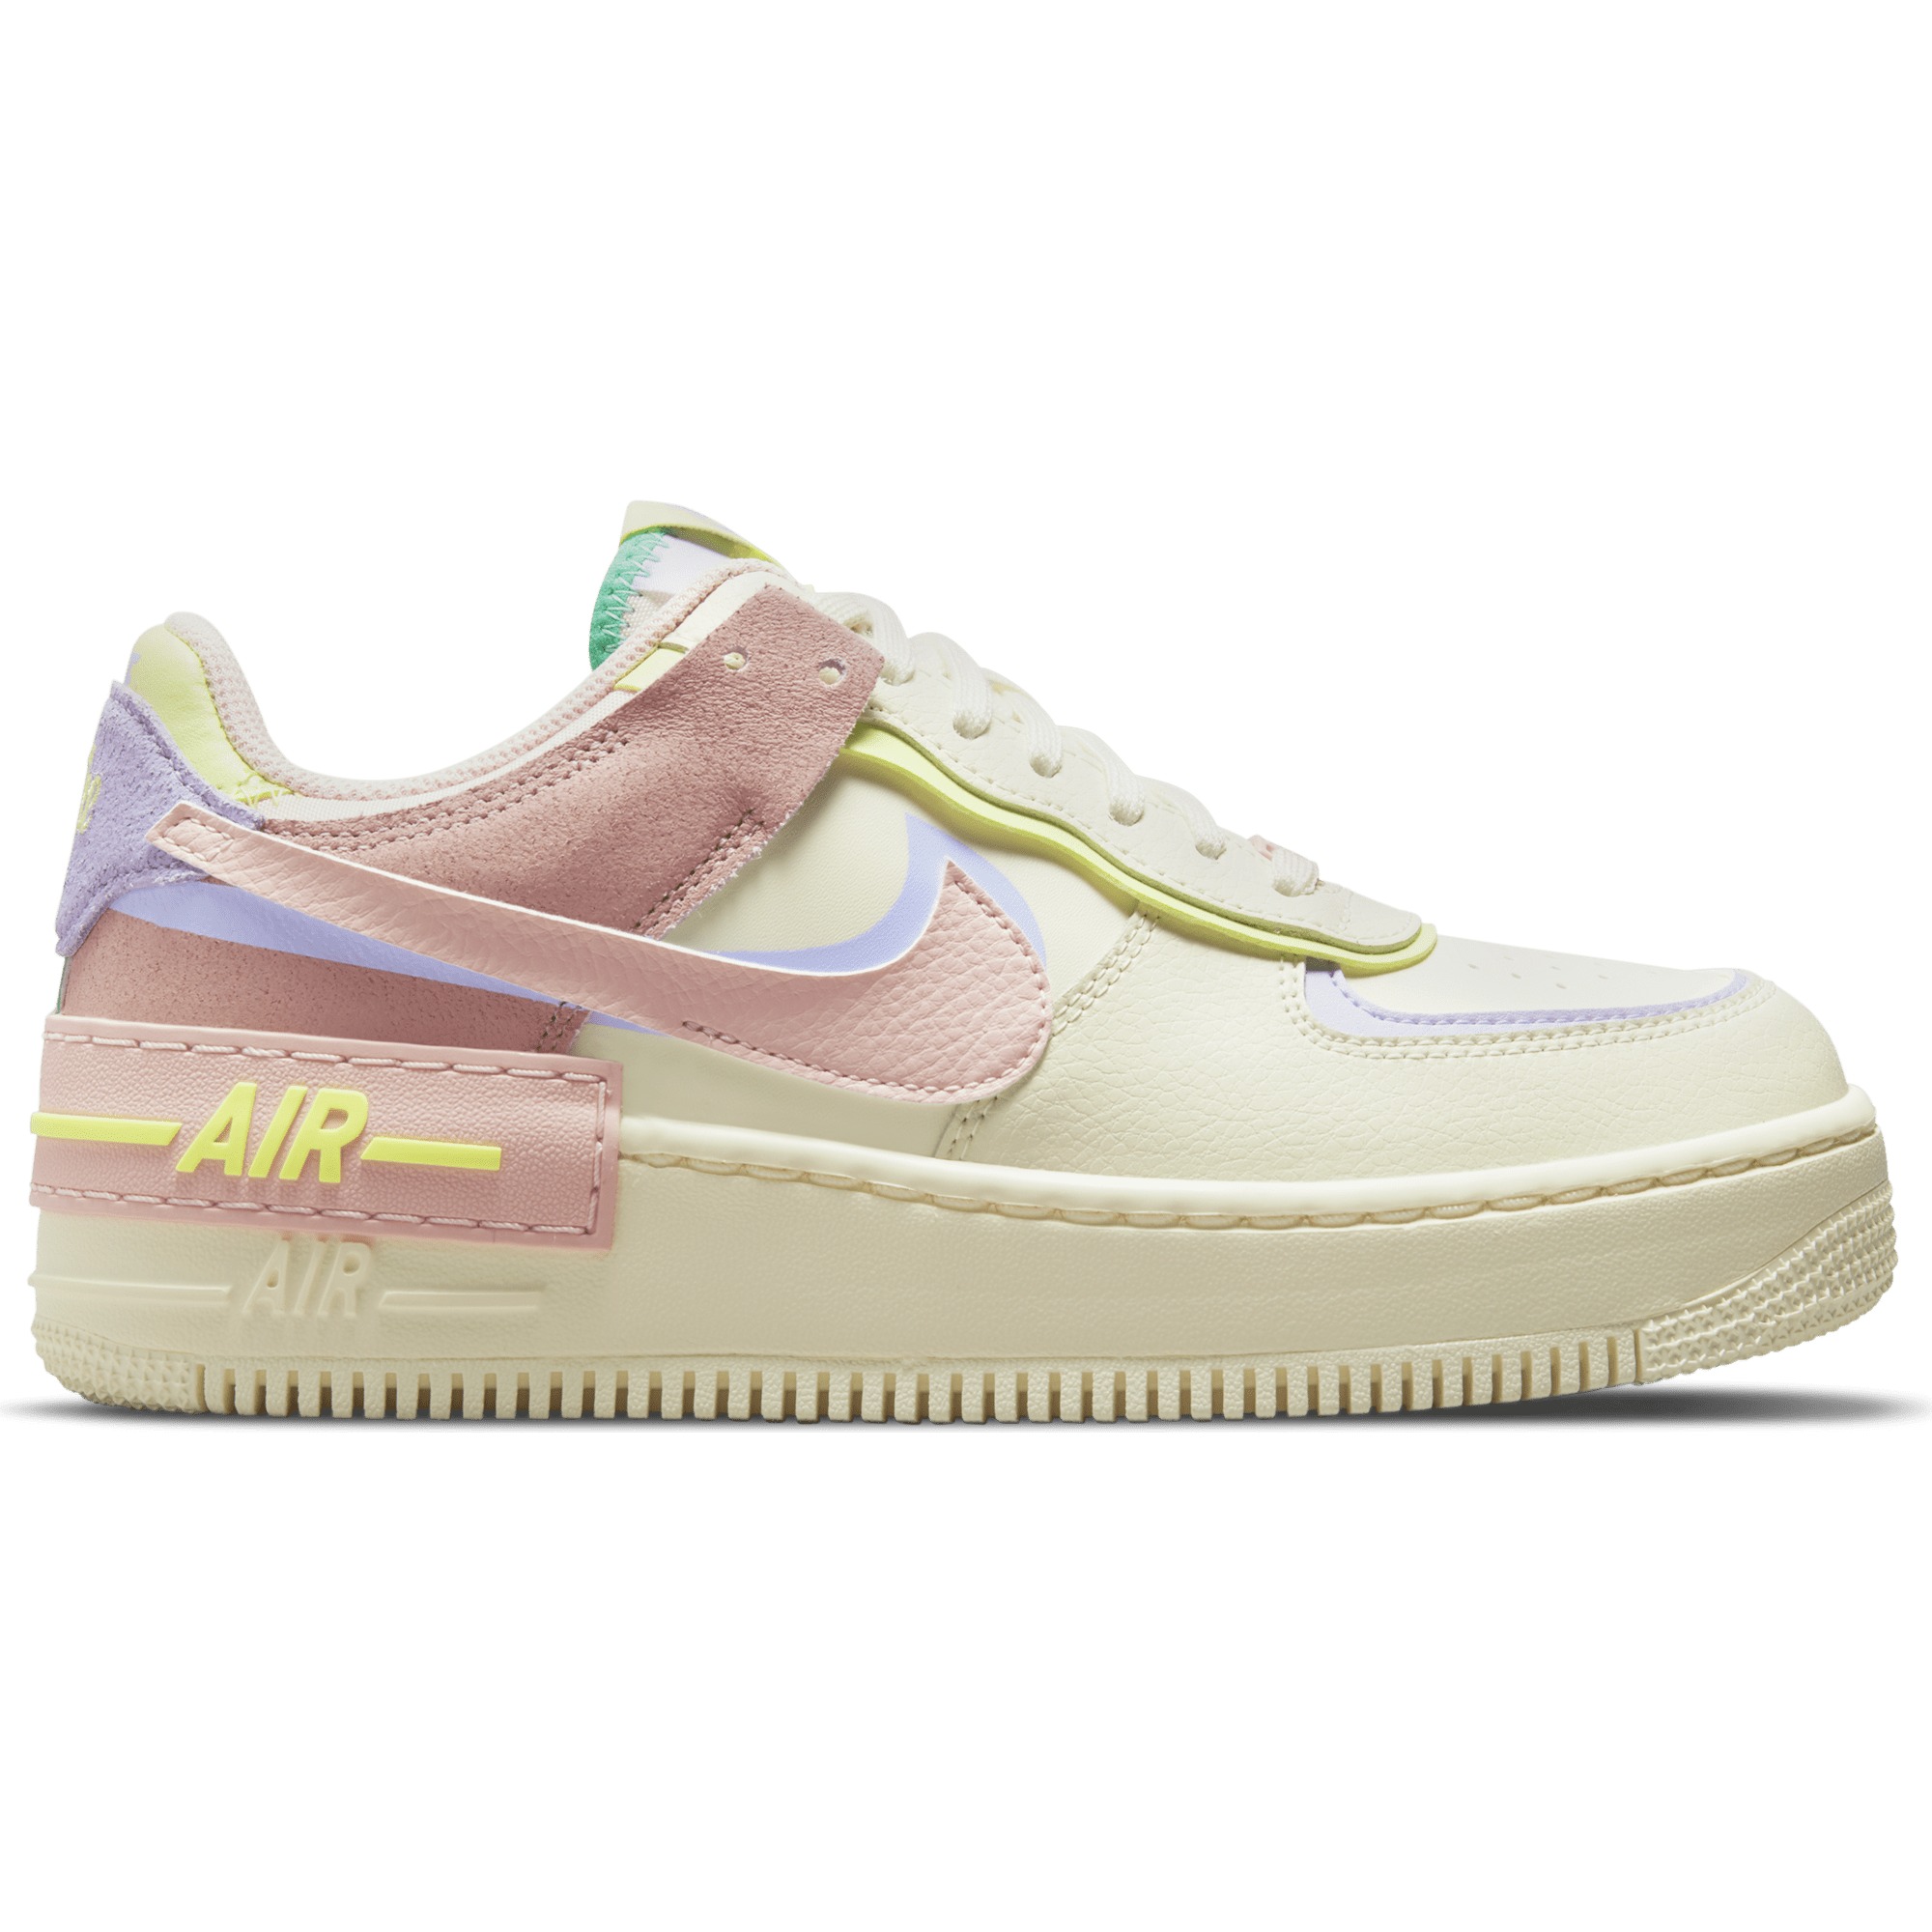 Nike Women's Air Force 1 Shadow Shoes, Size 6, White/Green/Yellow